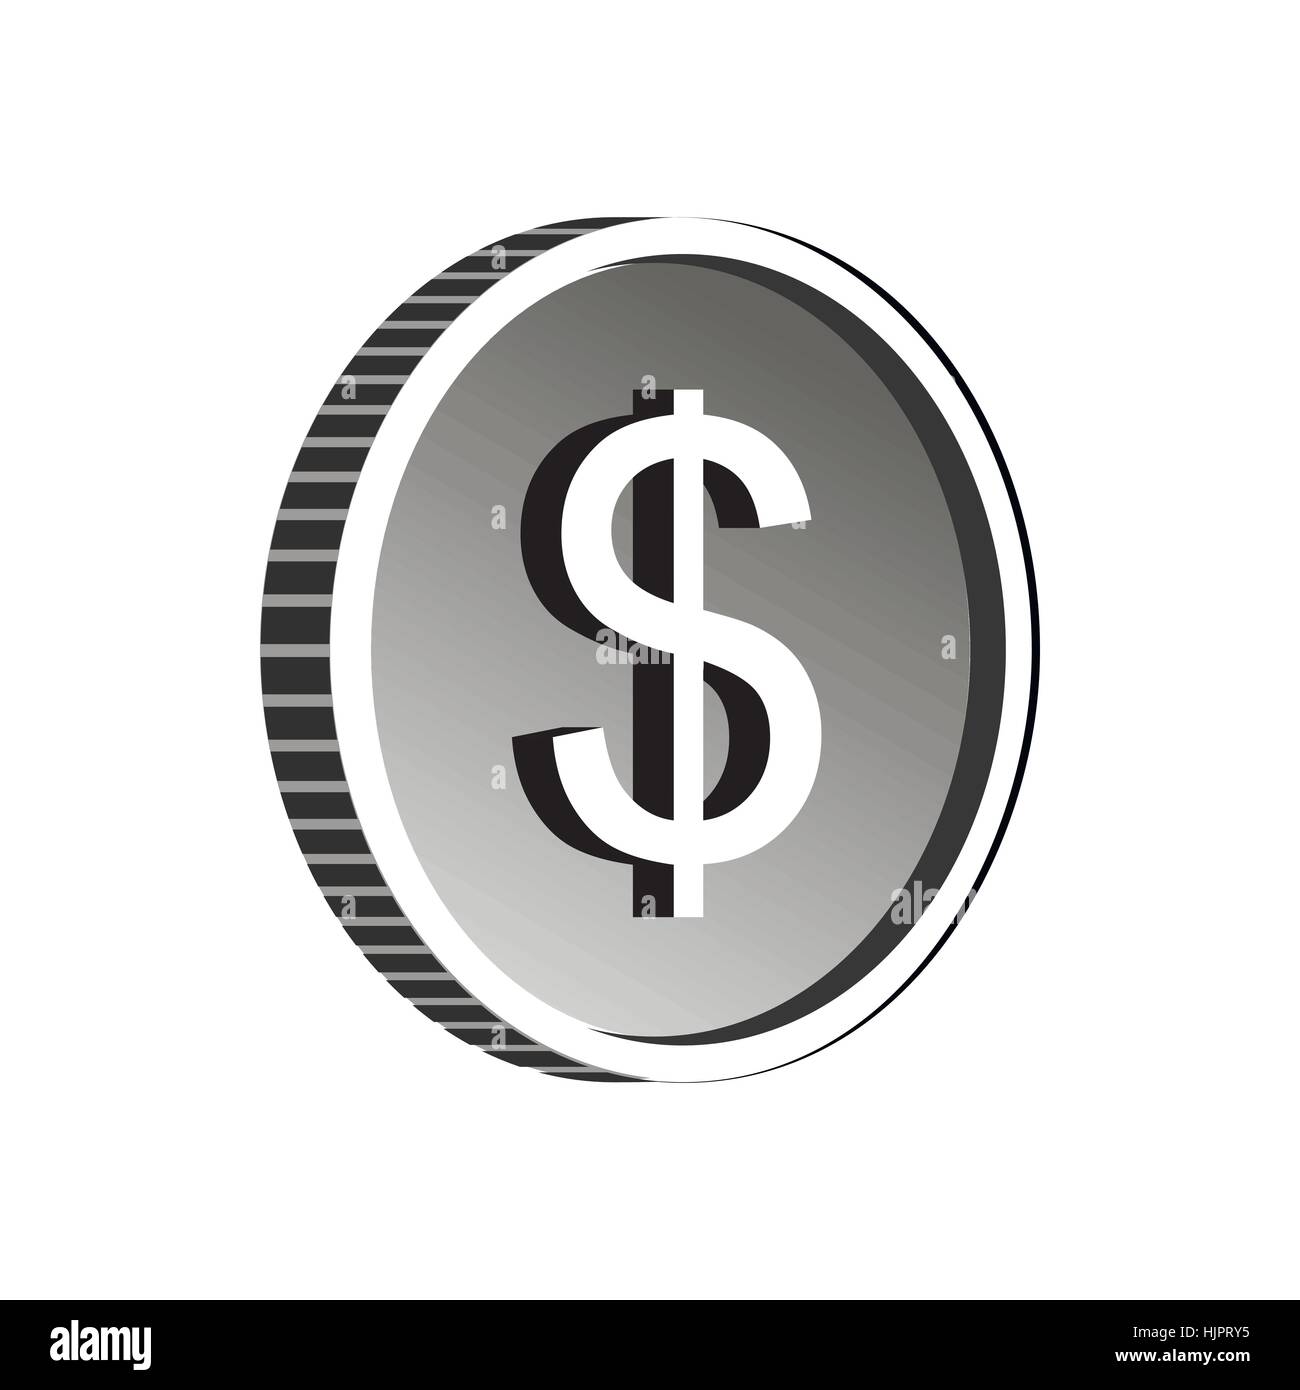 US dollar symbol icon in simple style isolated on white background Stock Vector